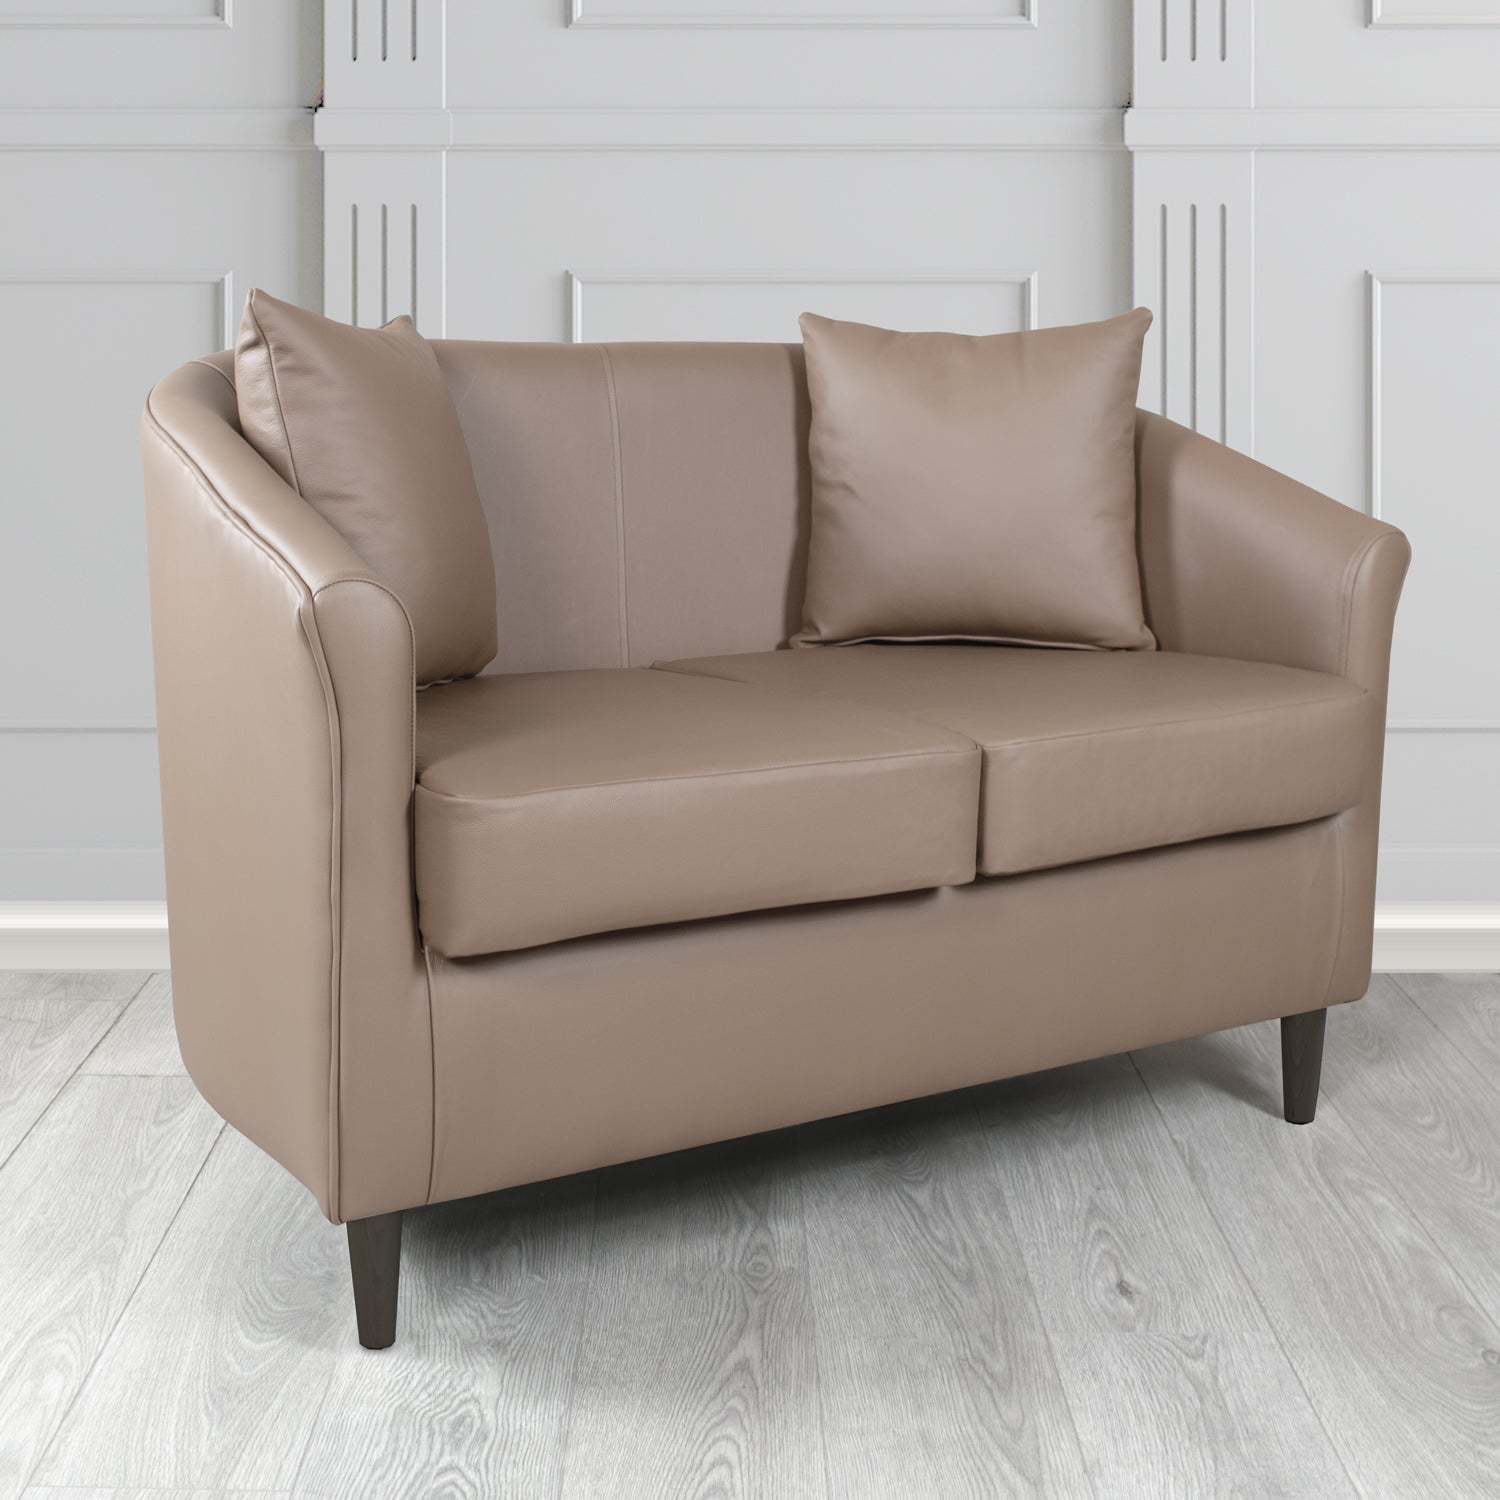 St Tropez Shelly Rocking Crib 5 Genuine Leather 2 Seater Tub Sofa with Scatter Cushions - The Tub Chair Shop